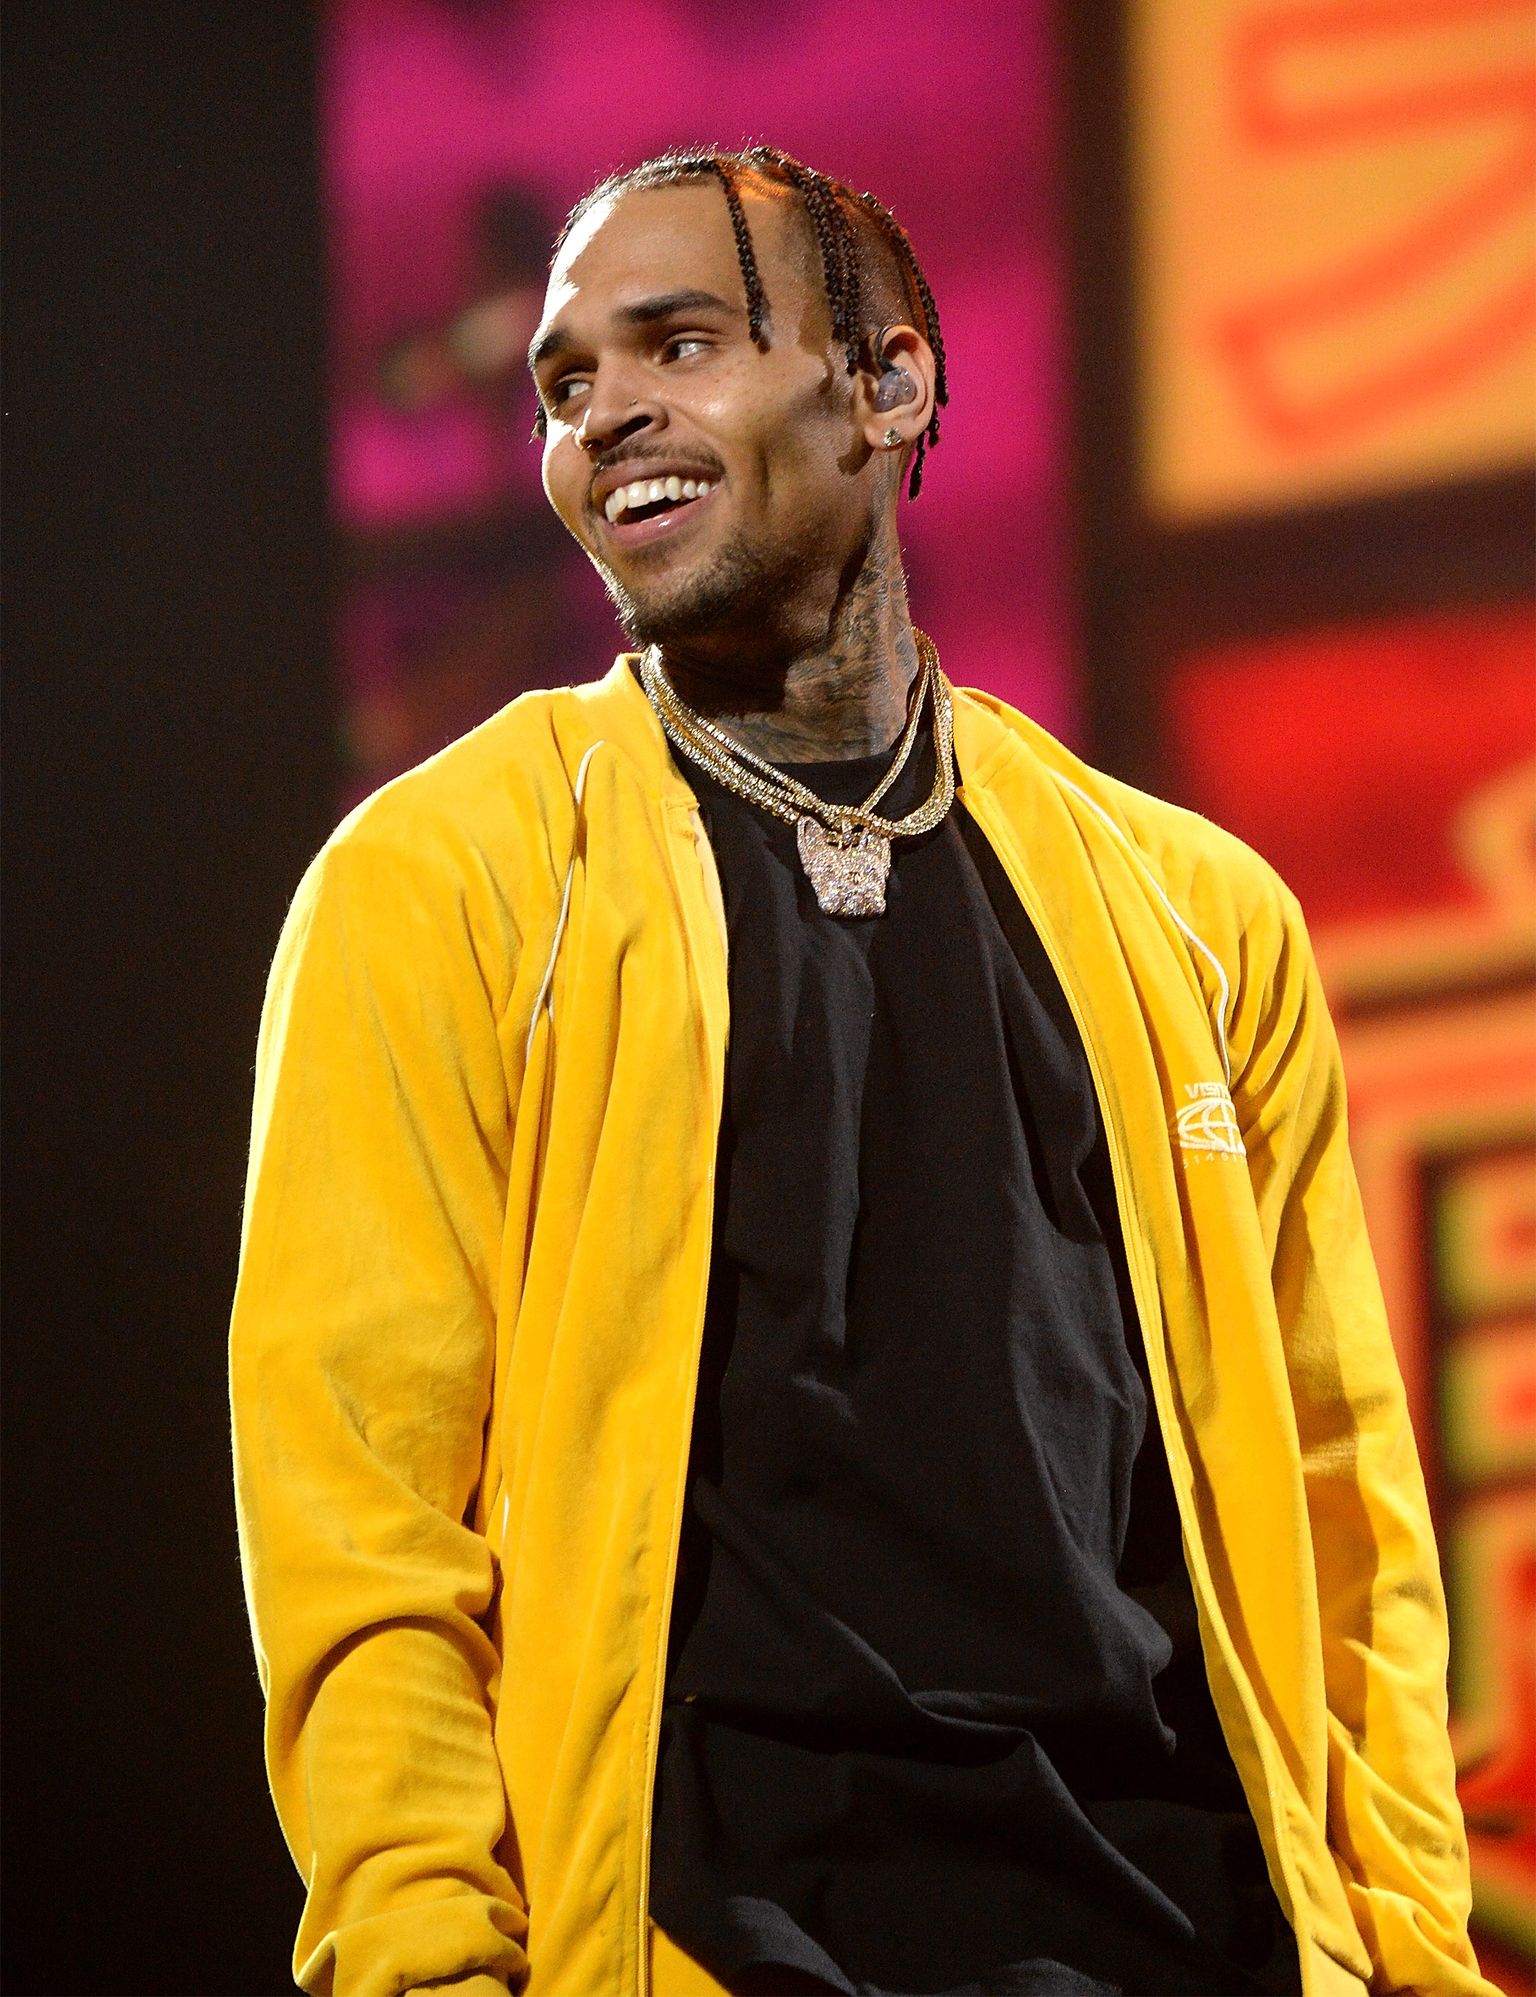 Chris Brown at the TIDAL X: Brooklyn at Barclays Center on October 17, 2017 in New York City. | Photo: Getty Images